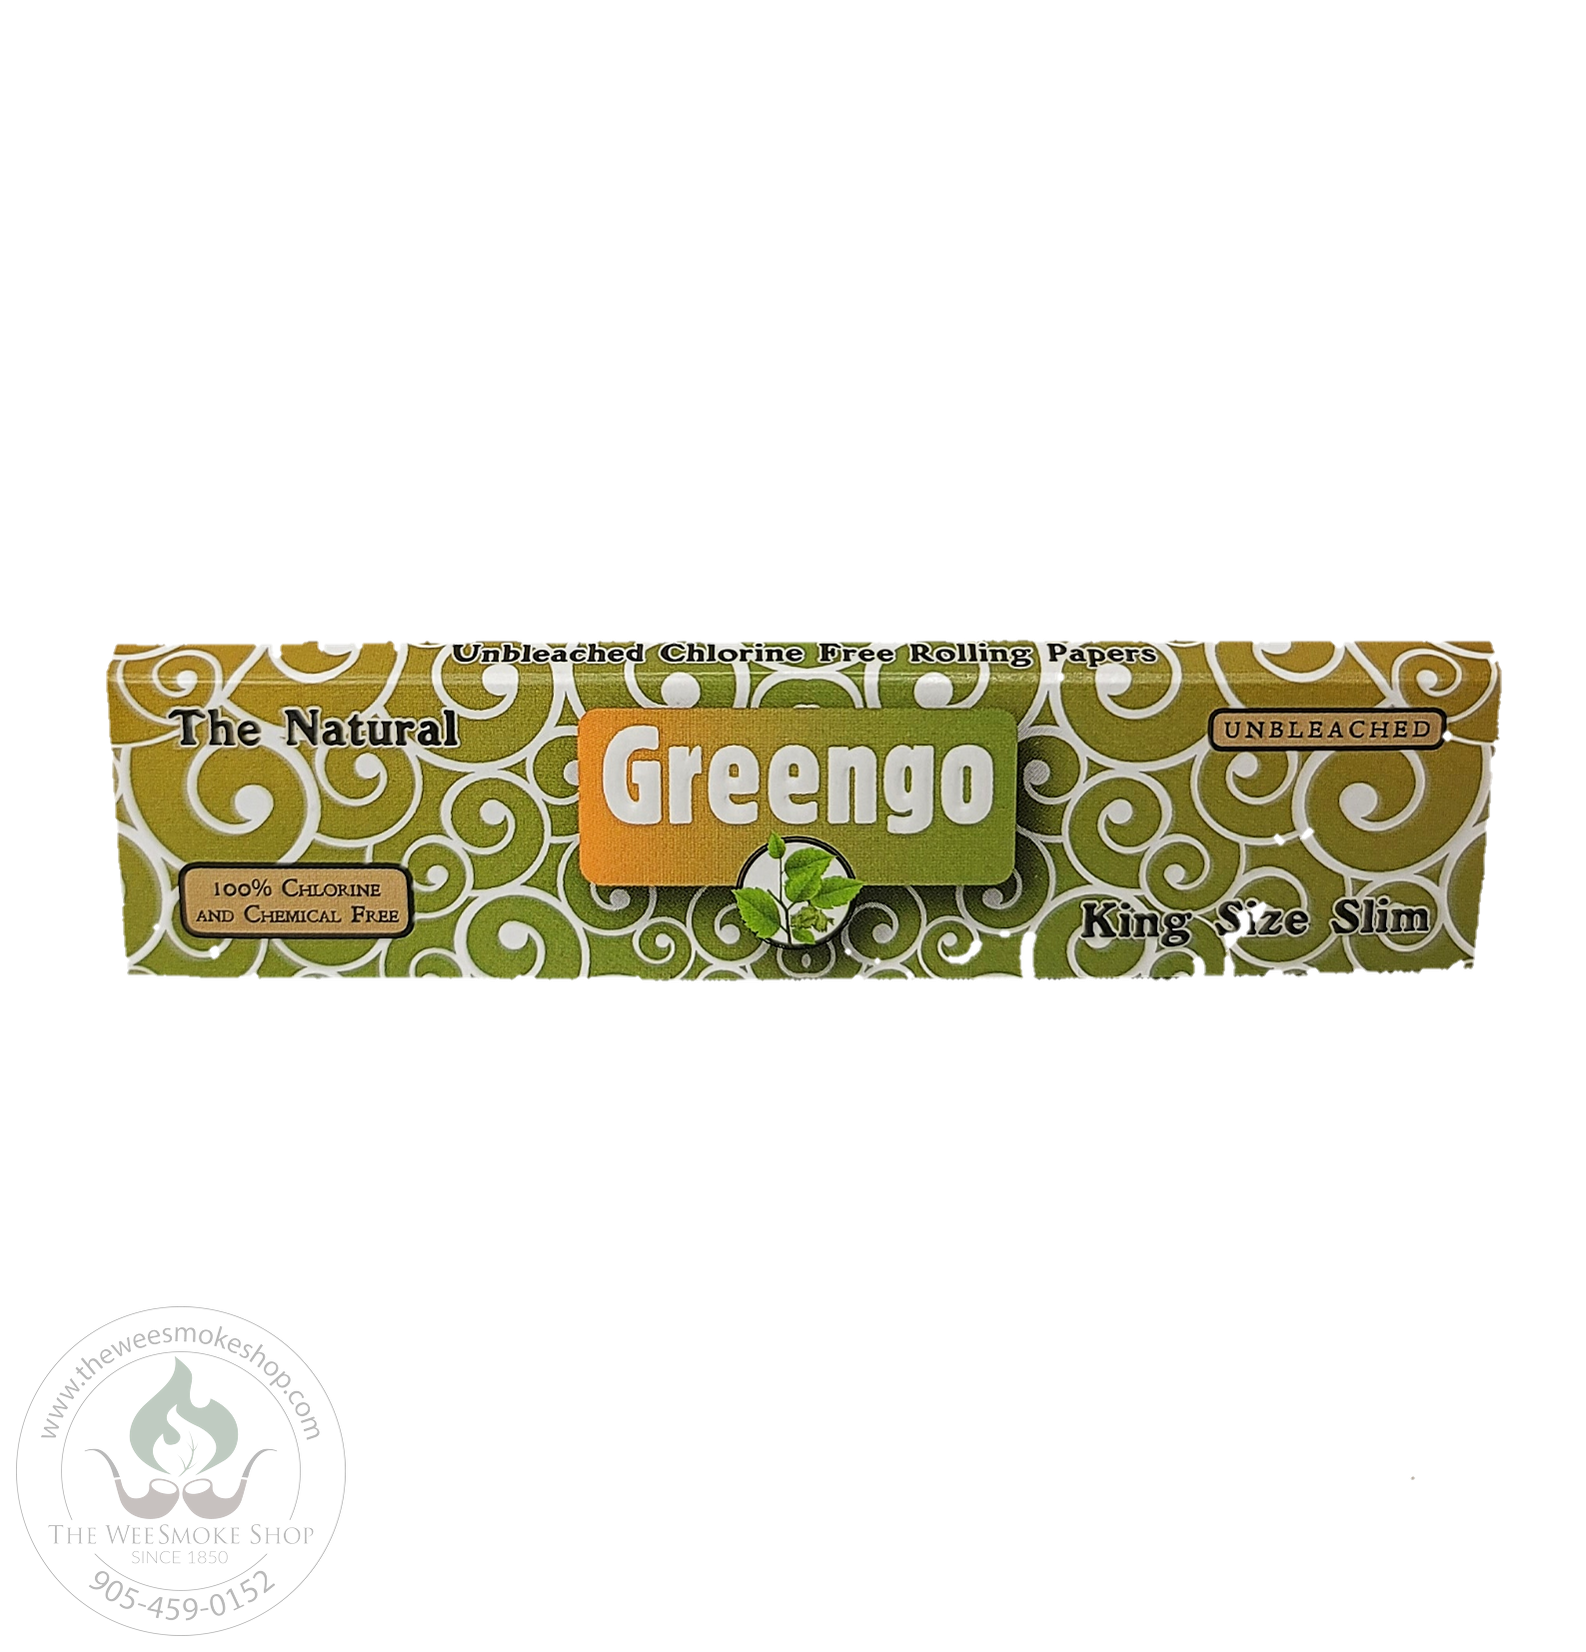 Greengo Rolling Papers. Natural. King size slim The Wee Smoke Shop